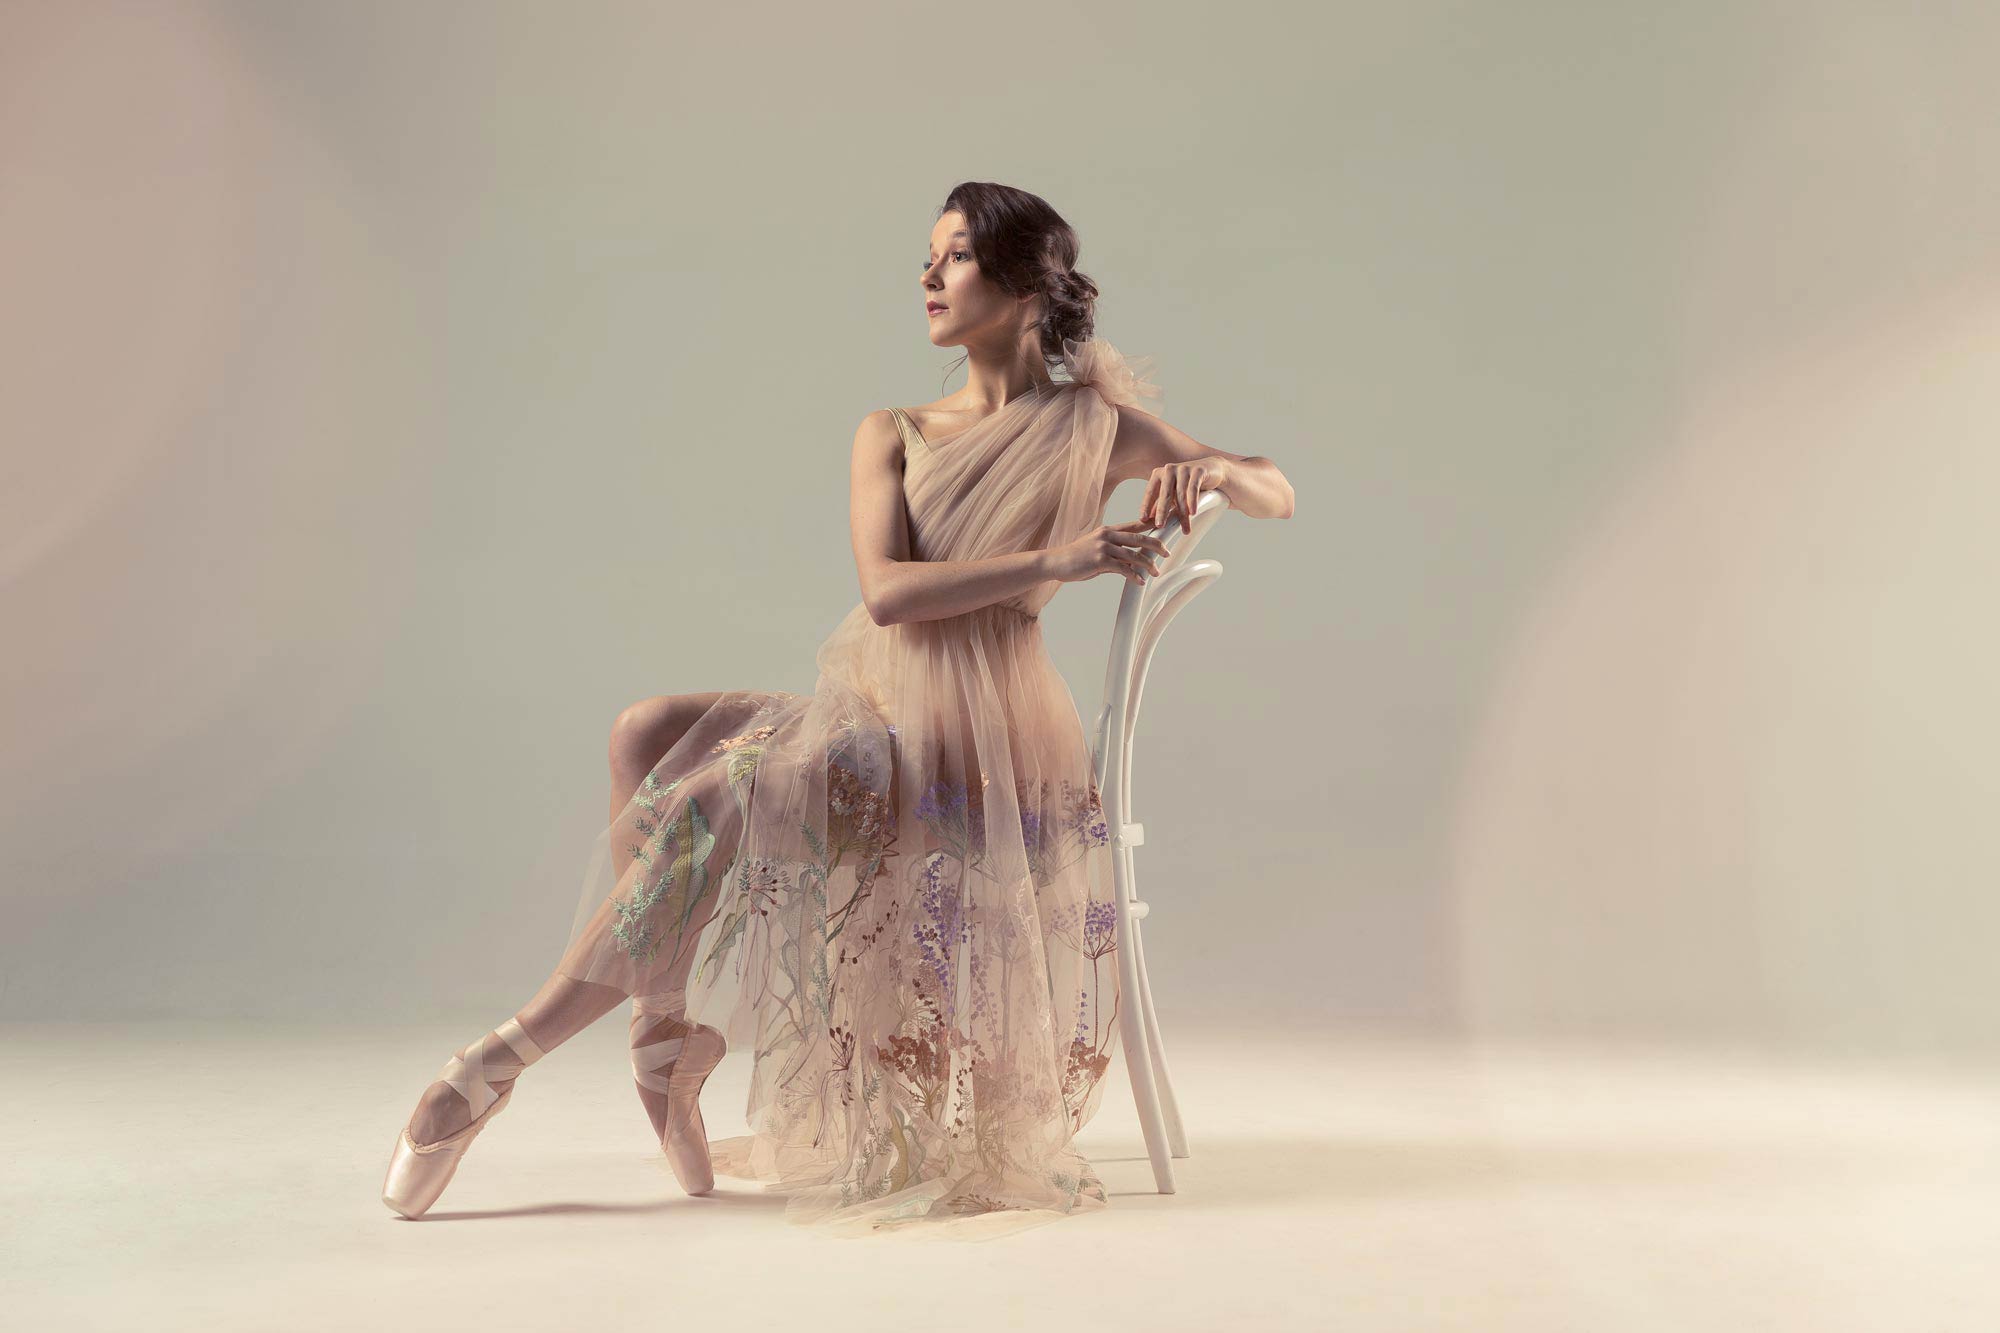 Ballet-inspired fashion photography